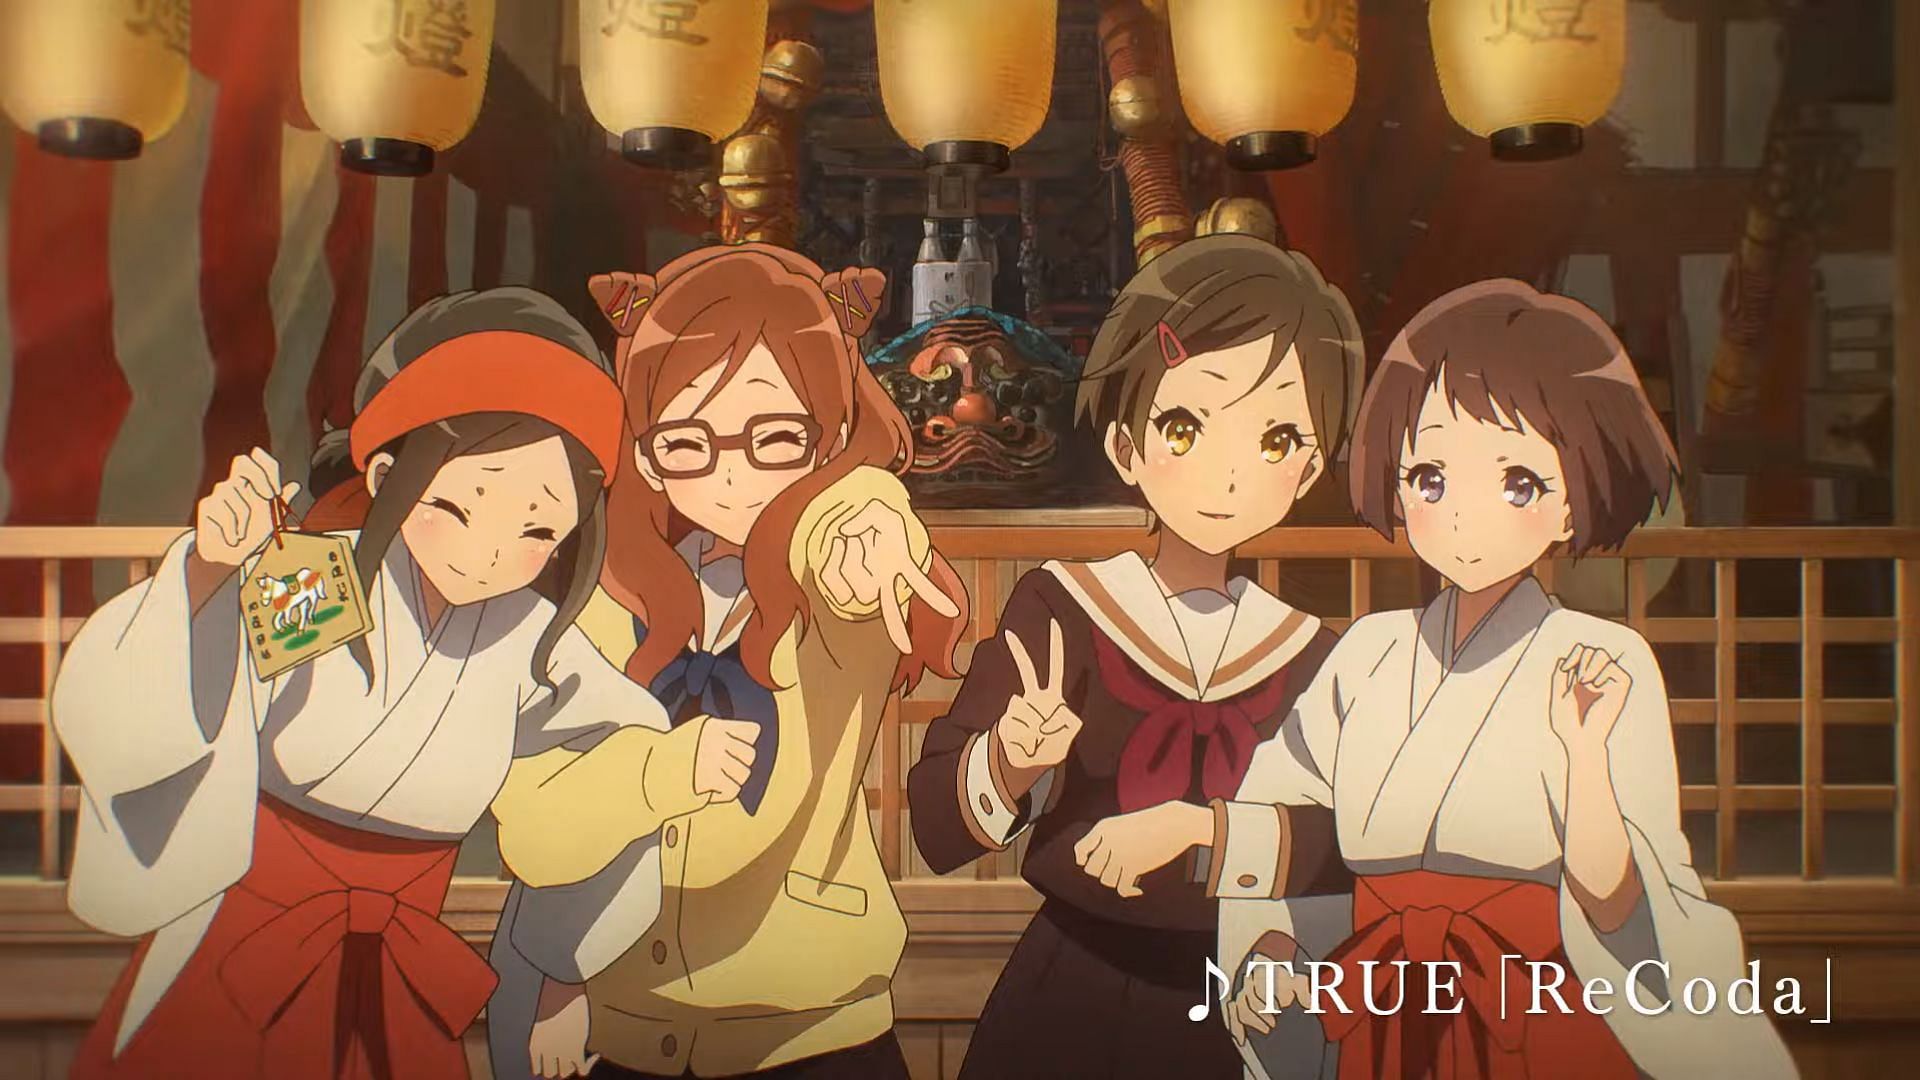 A scene from the newly released PV of Sound! Euphonium season 3 (Image via Kyoto Animation)